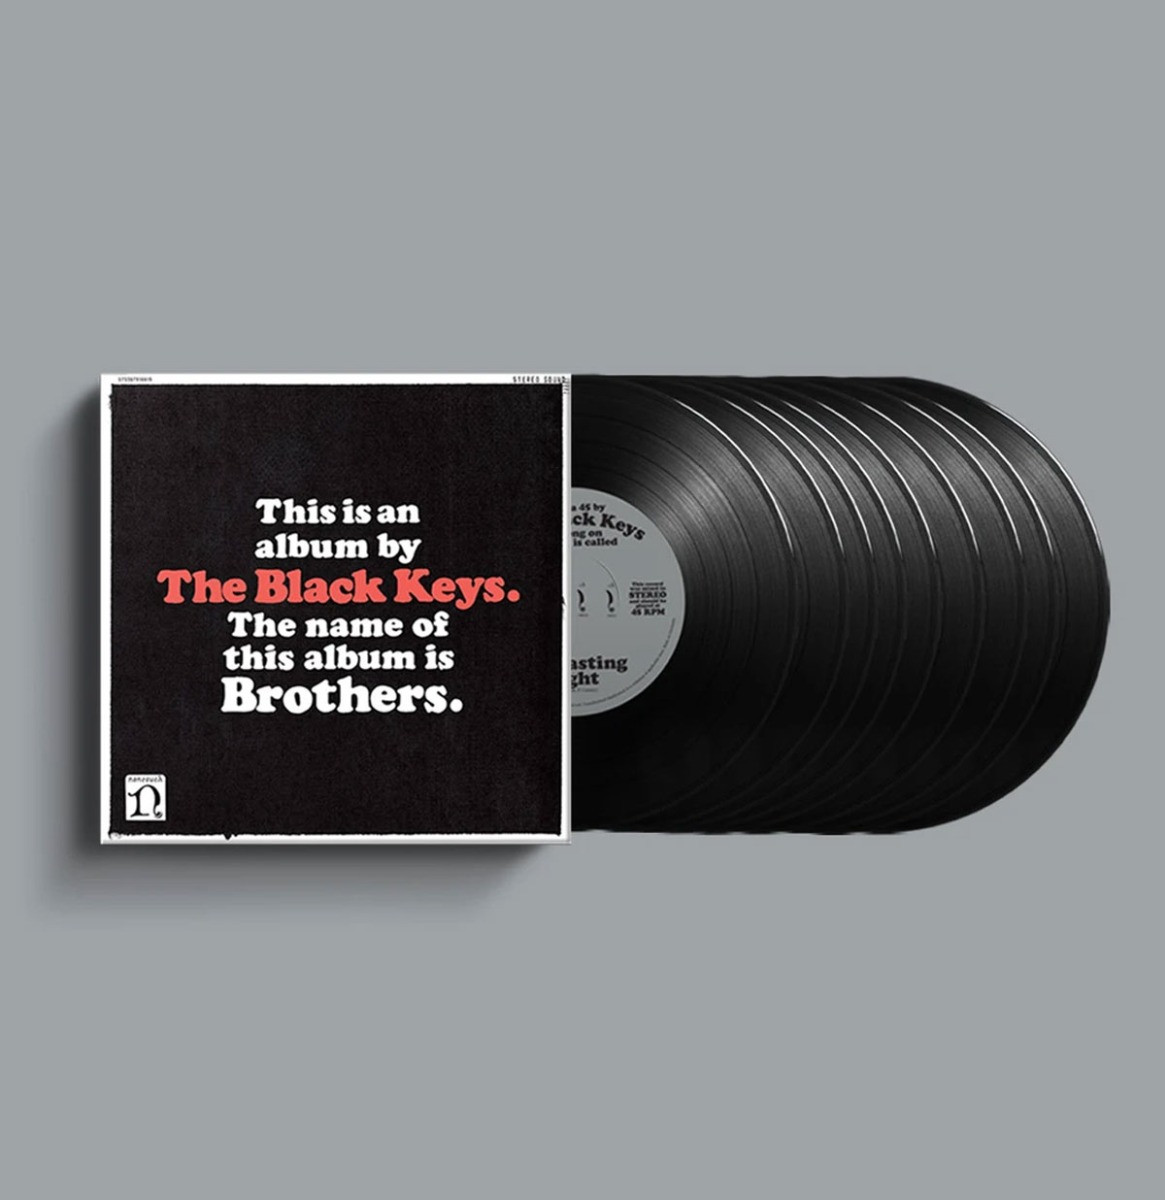 Black keys - Brothers (Deluxe Remastered Anniversary Edition) 7” Box Set